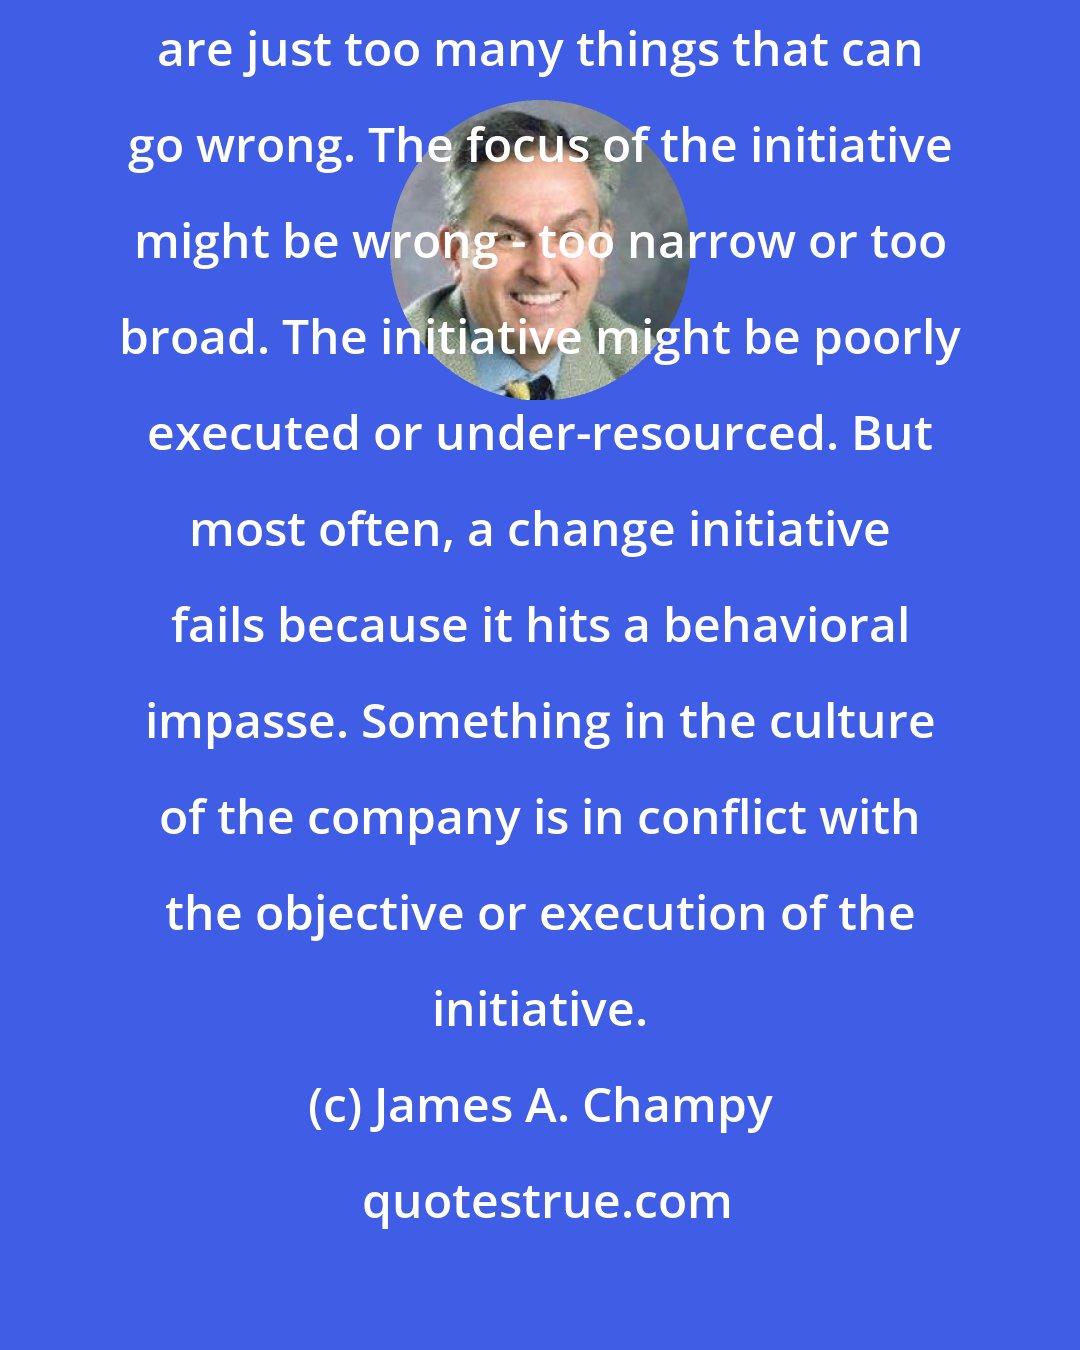 James A. Champy: A change initiative can fail for multiple reasons - in fact, there are just too many things that can go wrong. The focus of the initiative might be wrong - too narrow or too broad. The initiative might be poorly executed or under-resourced. But most often, a change initiative fails because it hits a behavioral impasse. Something in the culture of the company is in conflict with the objective or execution of the initiative.